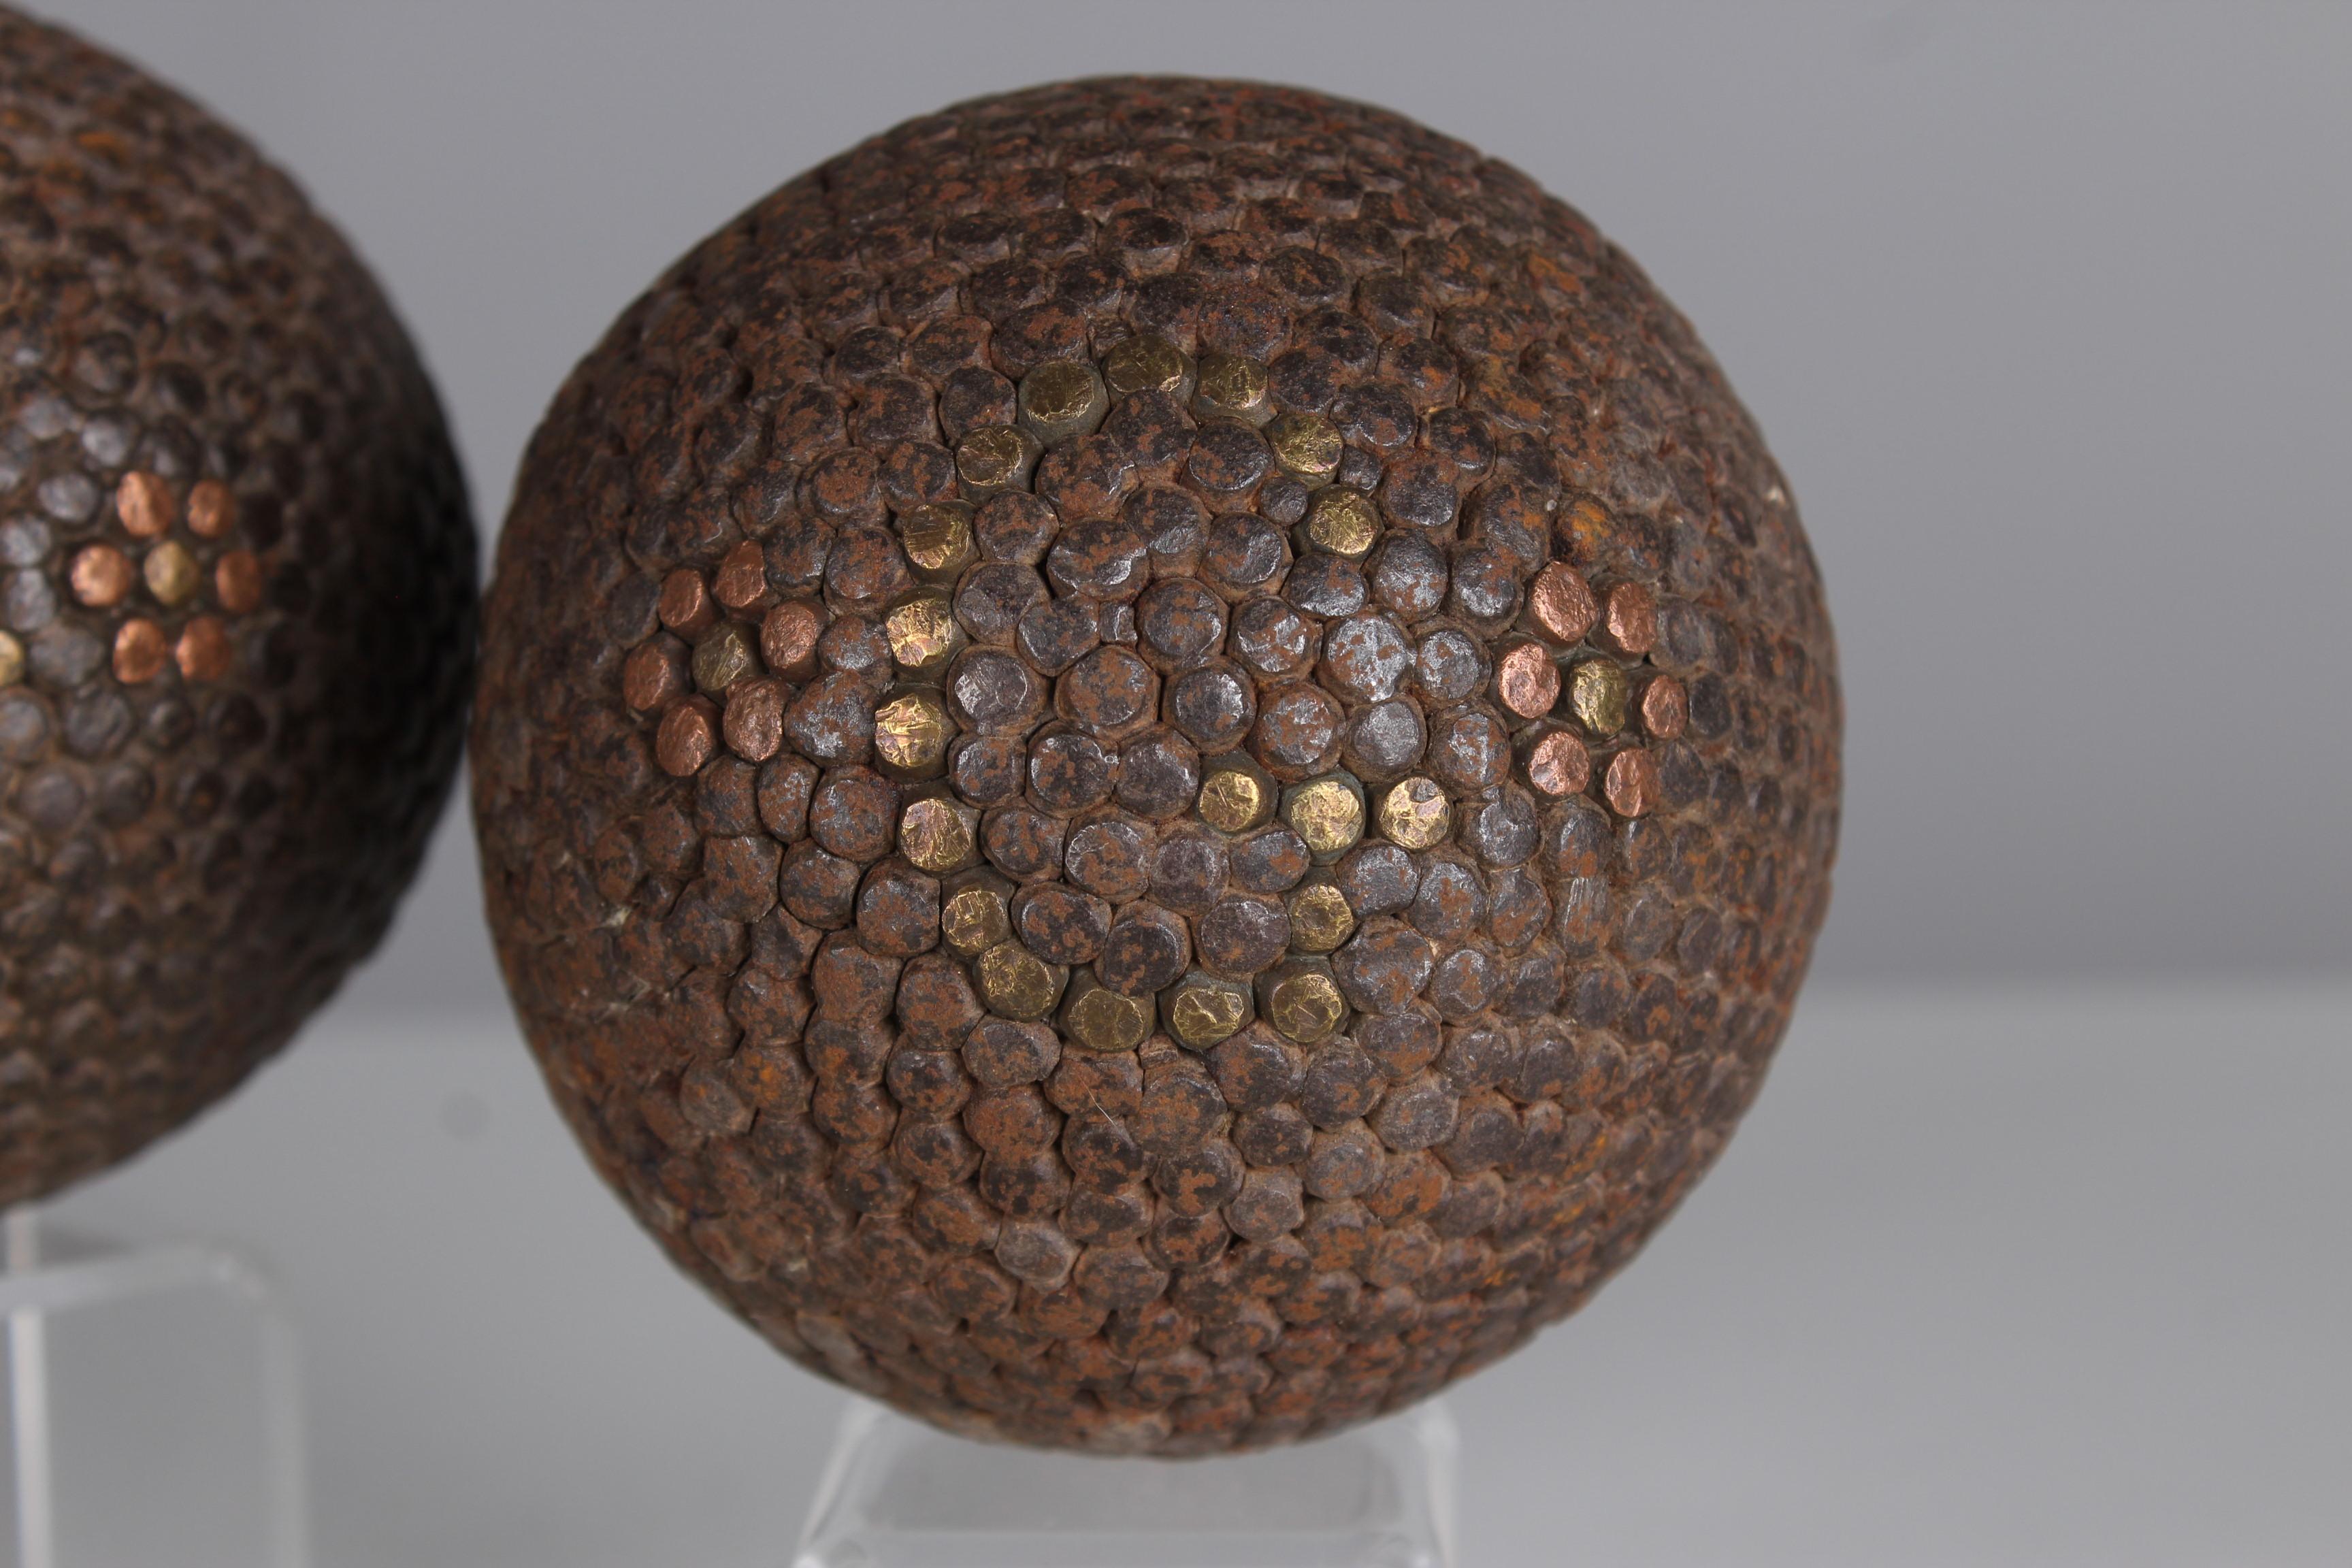 Beautiful, unique Boule ball pair, France, late 19th Century.

In the 19th century, the manufacture of boules balls underwent significant development in France as the game of boules, particularly the pétanque variant, gained in popularity. The